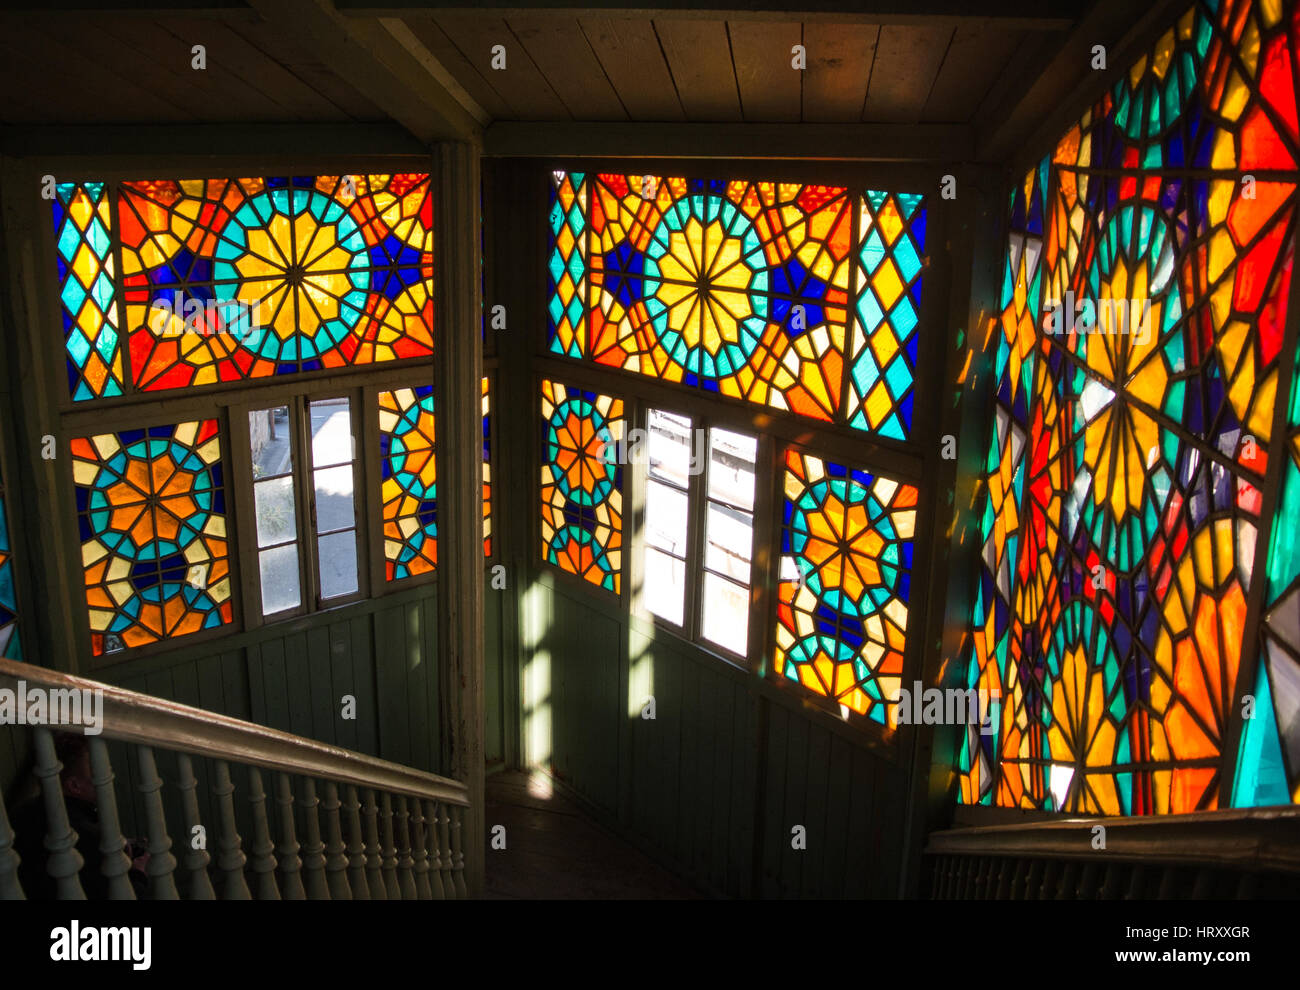 TBILISI, GEORGIA - JANUARY 3, 2016: Interior of an old house with mosaic windows in the old town of Tbilisi, Georgia. Stock Photo